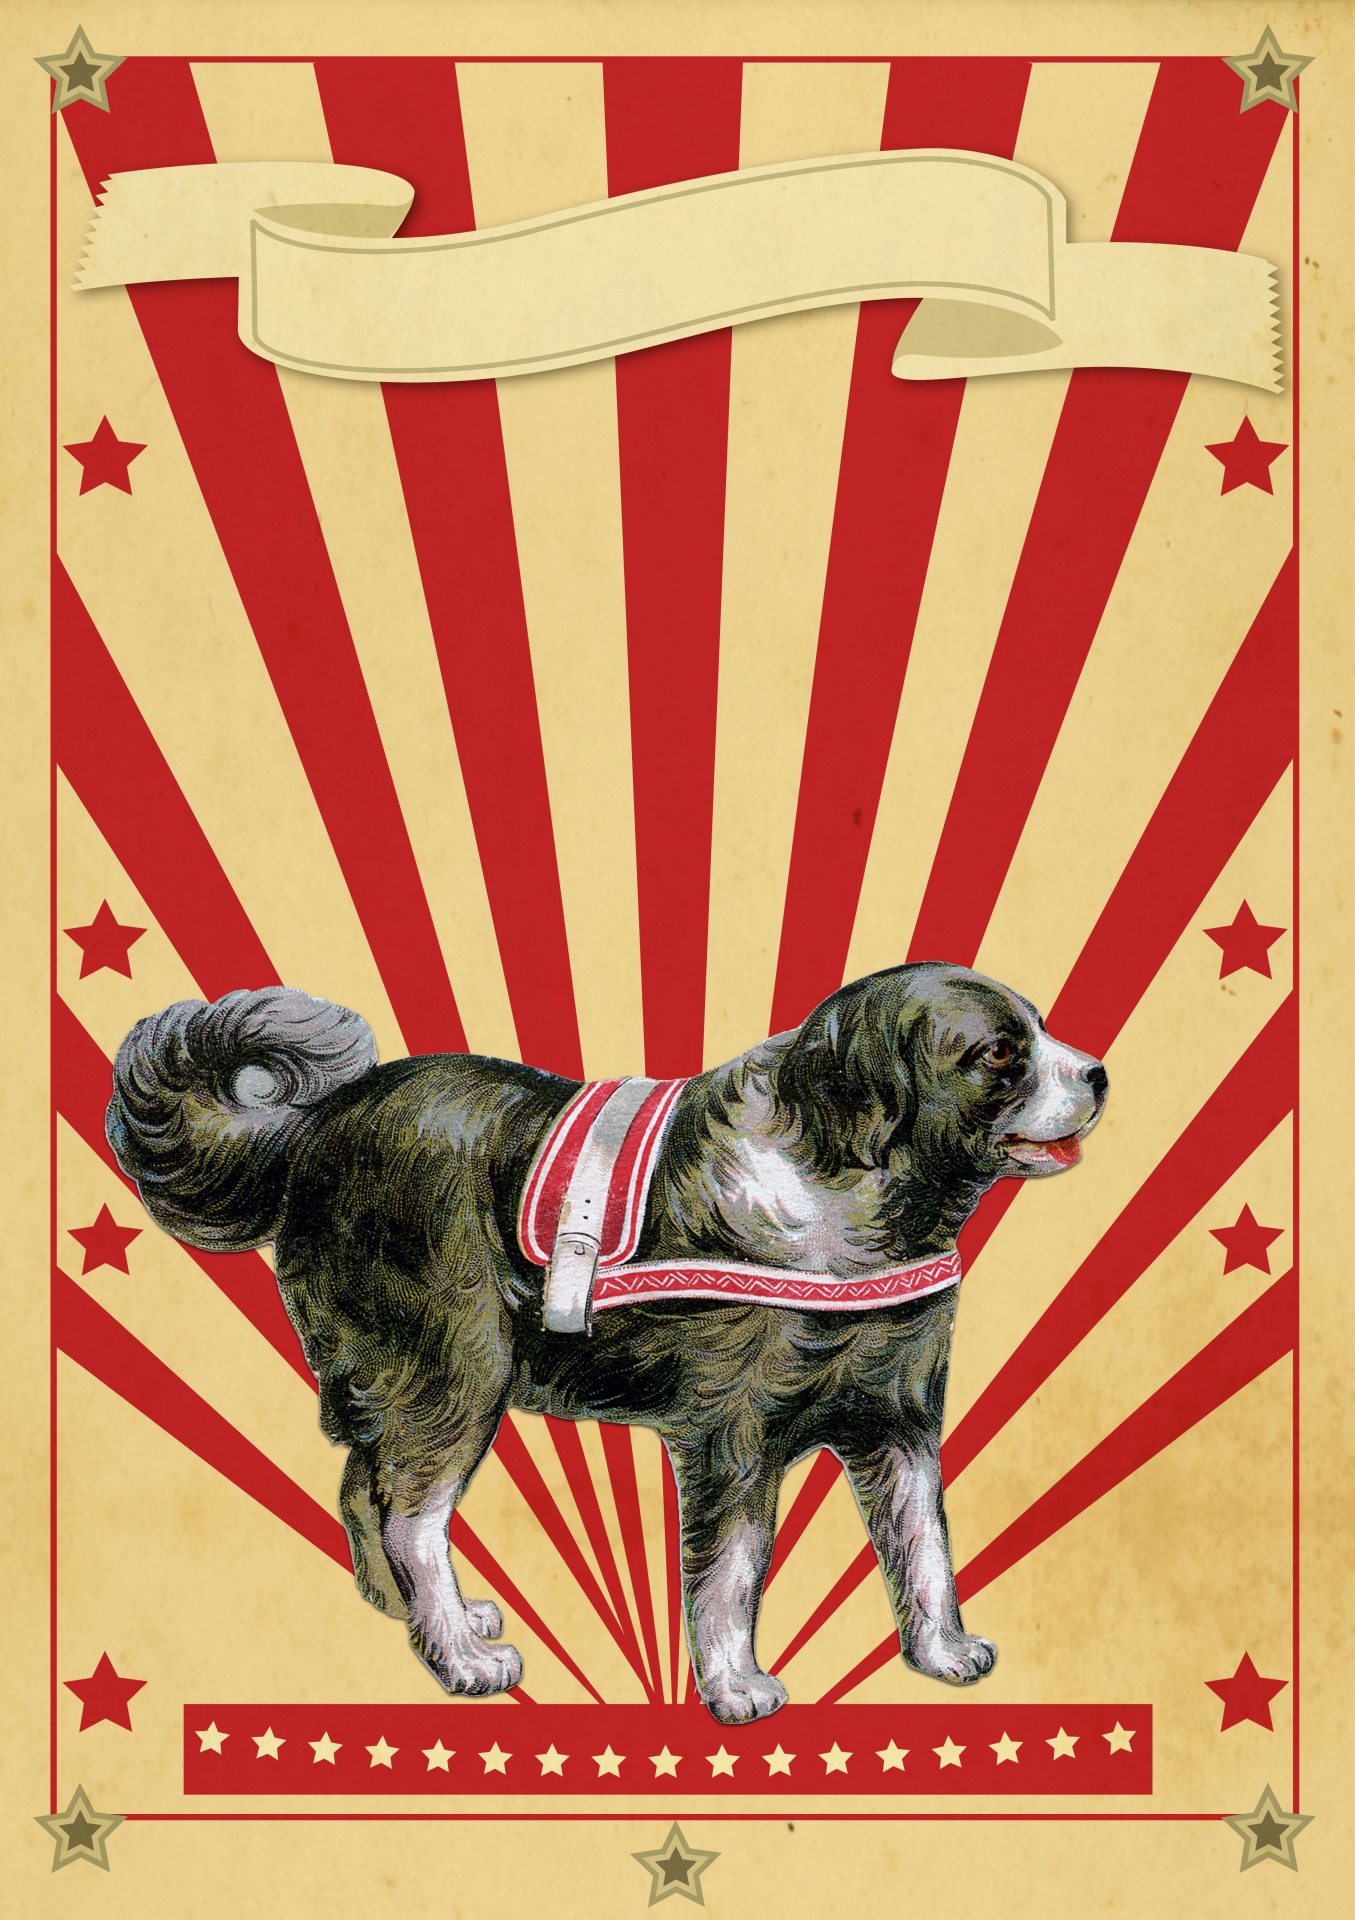 Vintage retro style circus poster with large performing dog